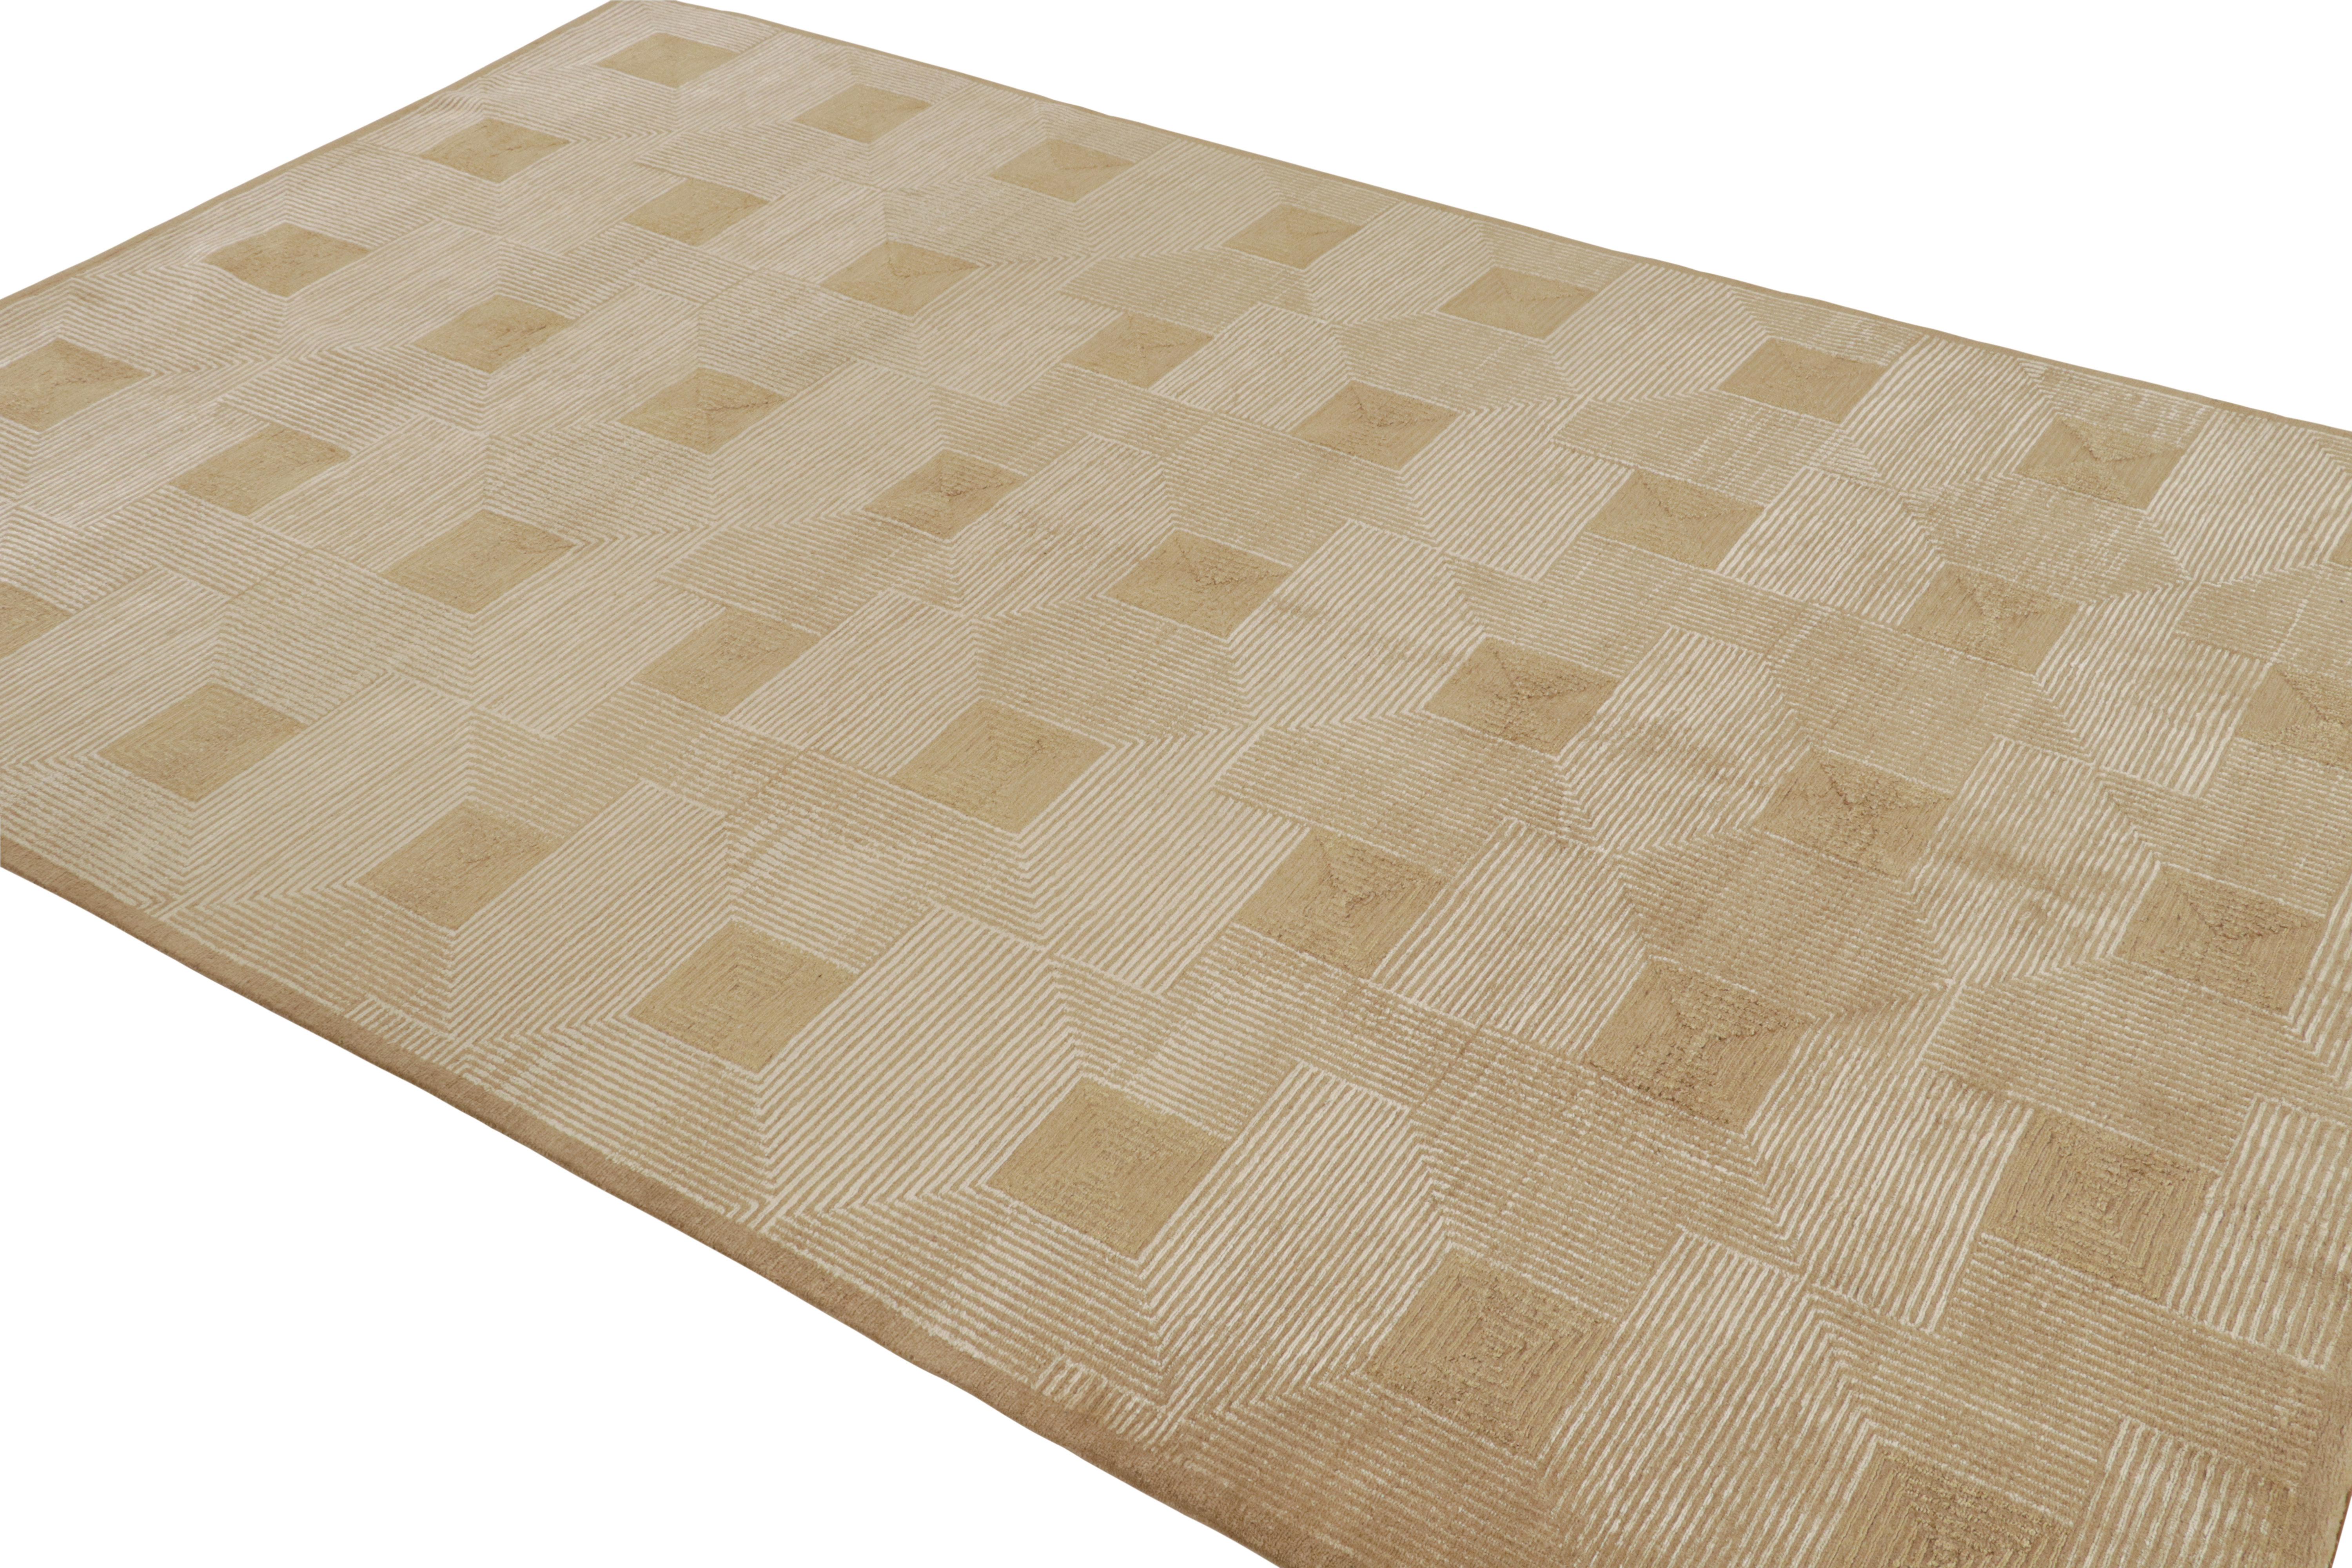 This 6x9 contemporary rug is a new addition to the Art Deco rug collection by Rug & Kilim. Hand-knotted in a luxurious blend of wool and silk, its design is inspired by cubism and similar modernist sensibilities, 

On the Design: 

Beige-brown,